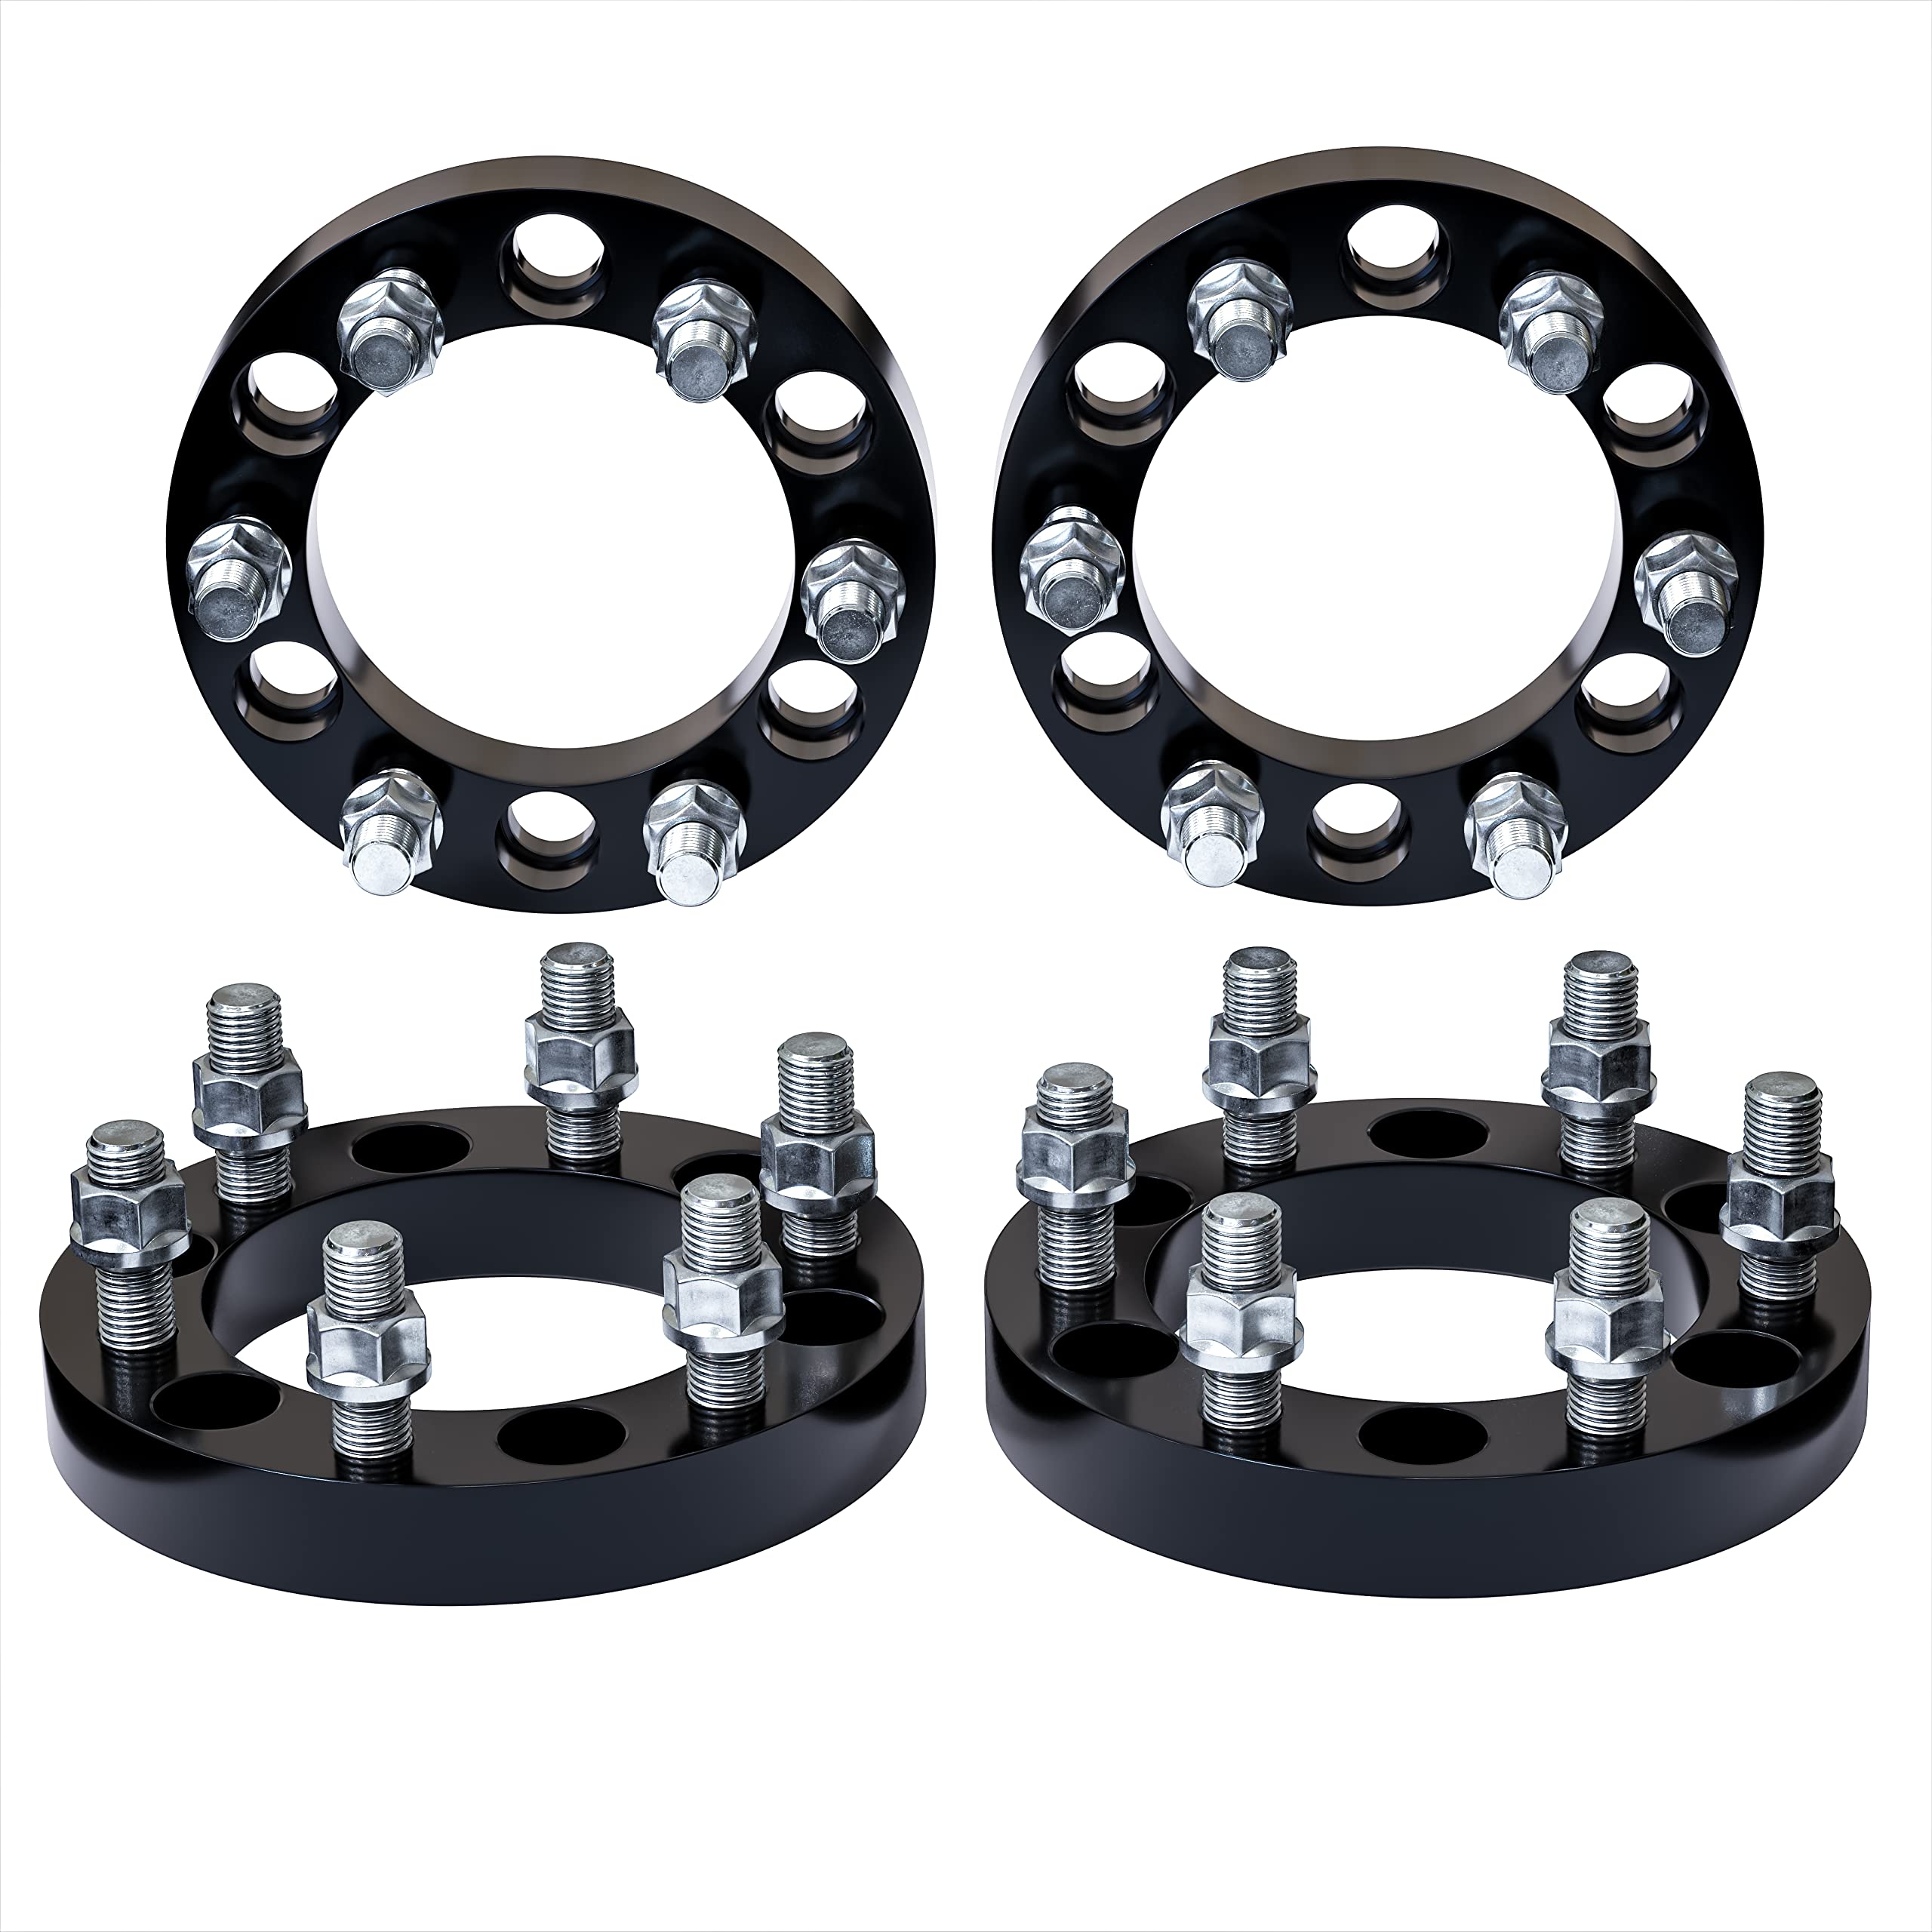 Wheel Spacer Set Compatible with Cadillac, Chevy, GMC  - Very Good